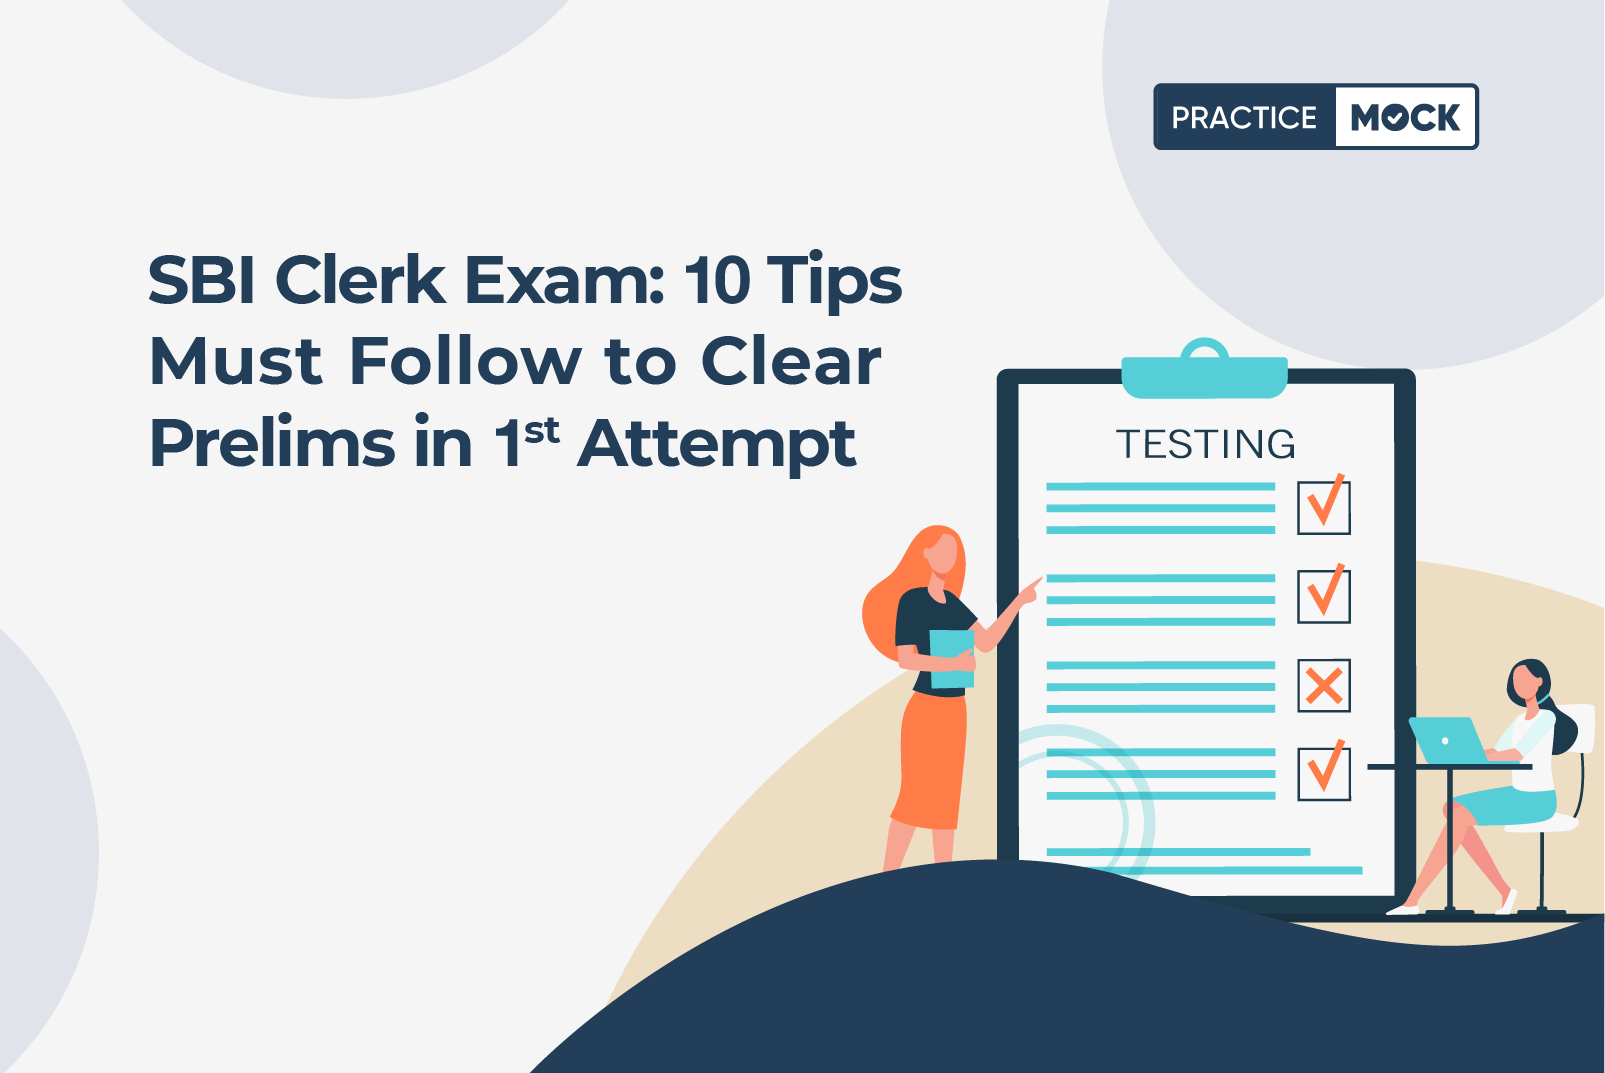 SBI Clerk Exam: 10 Tips Must Follow to Clear Prelims in 1st Attempt